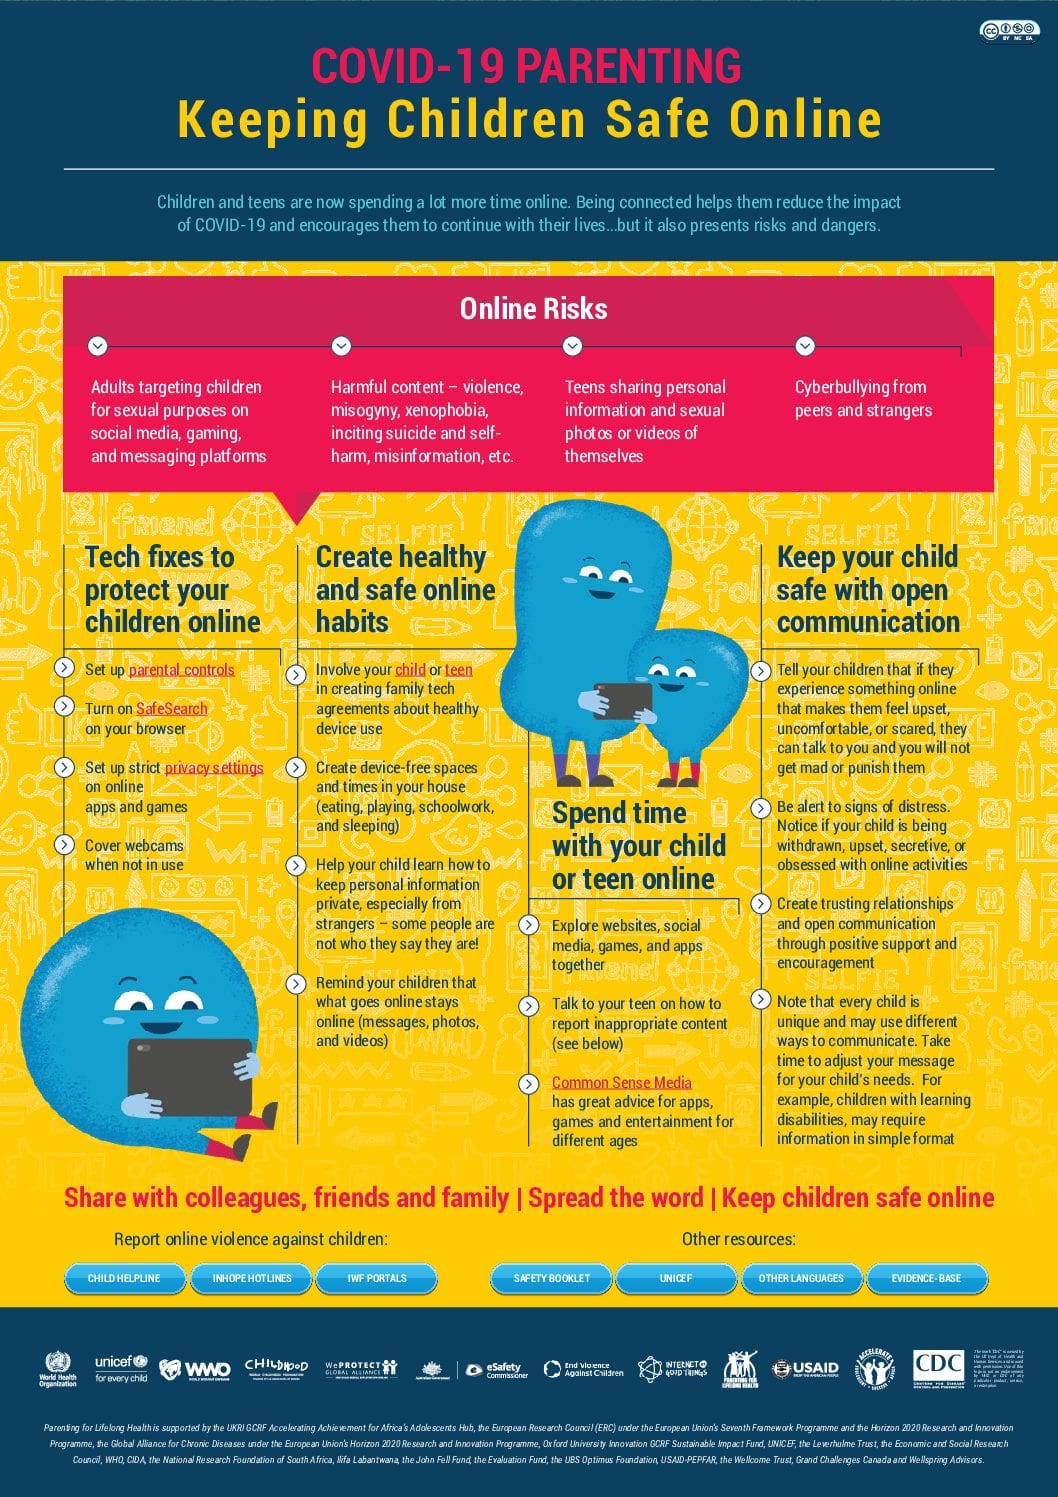 COVID-19 Parenting: How to Keep Your Children Safe Online